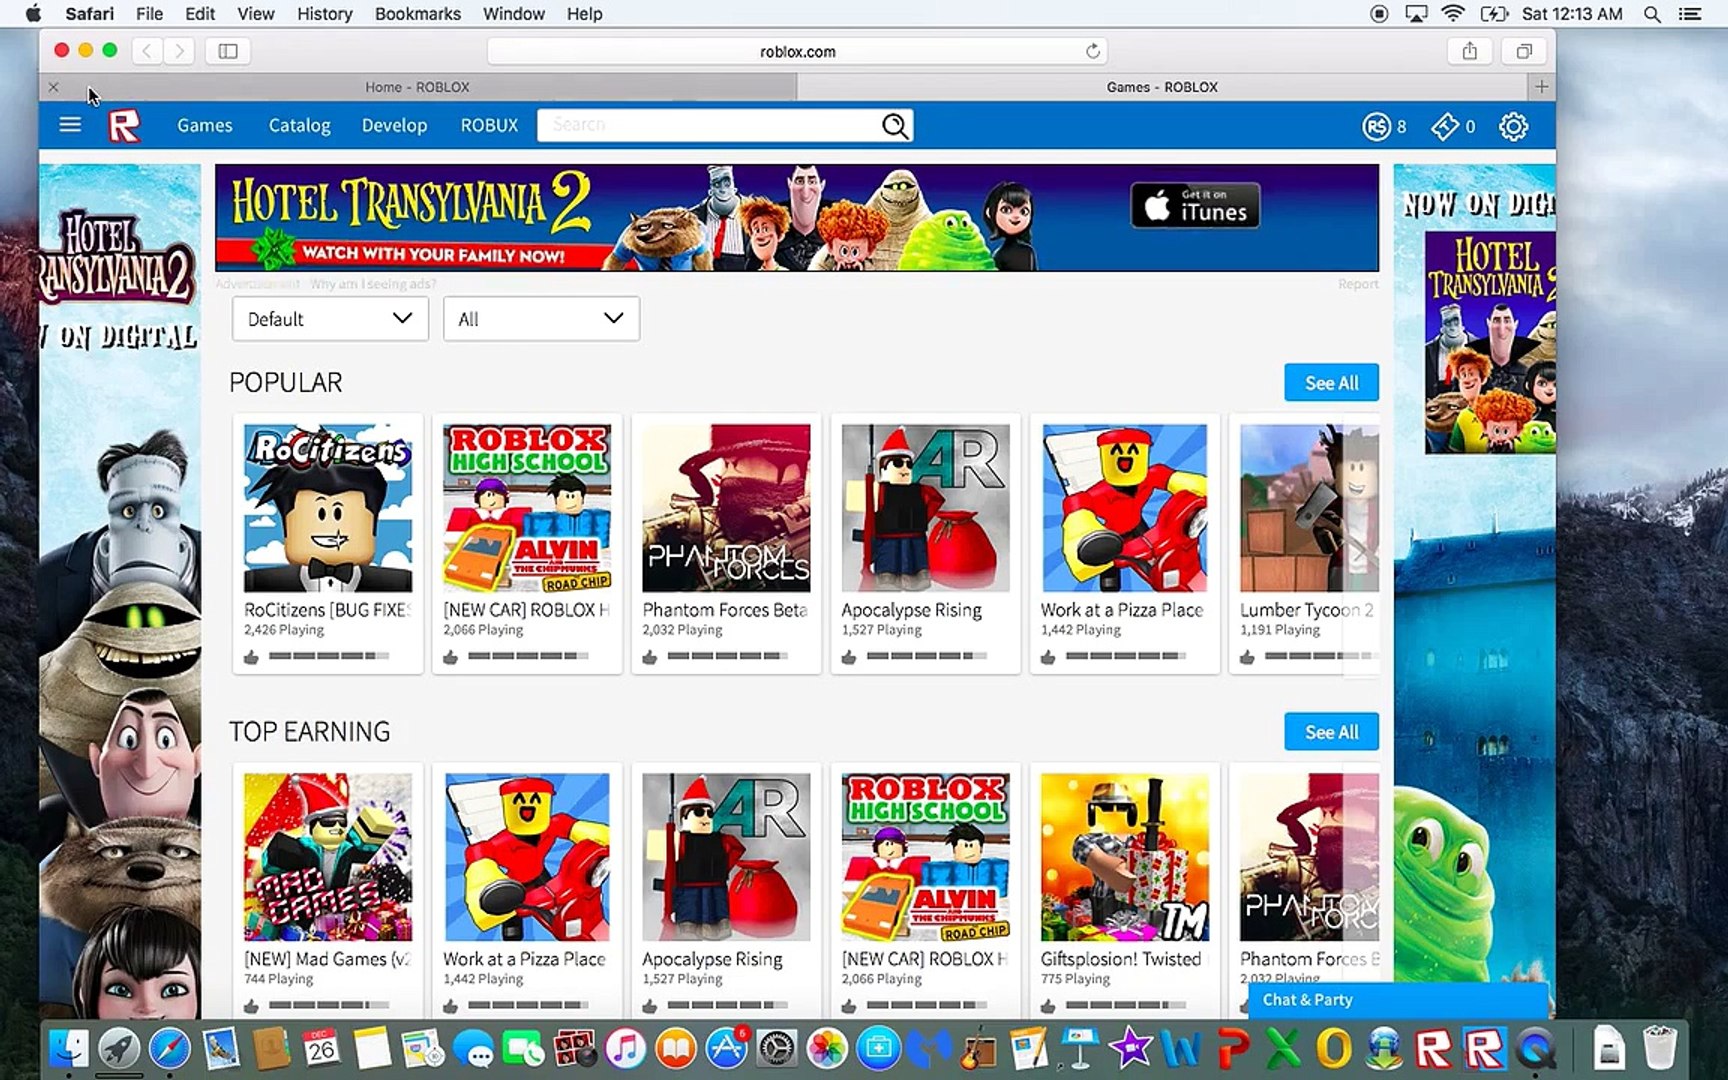 Games On Roblox Video Dailymotion - roblox com h